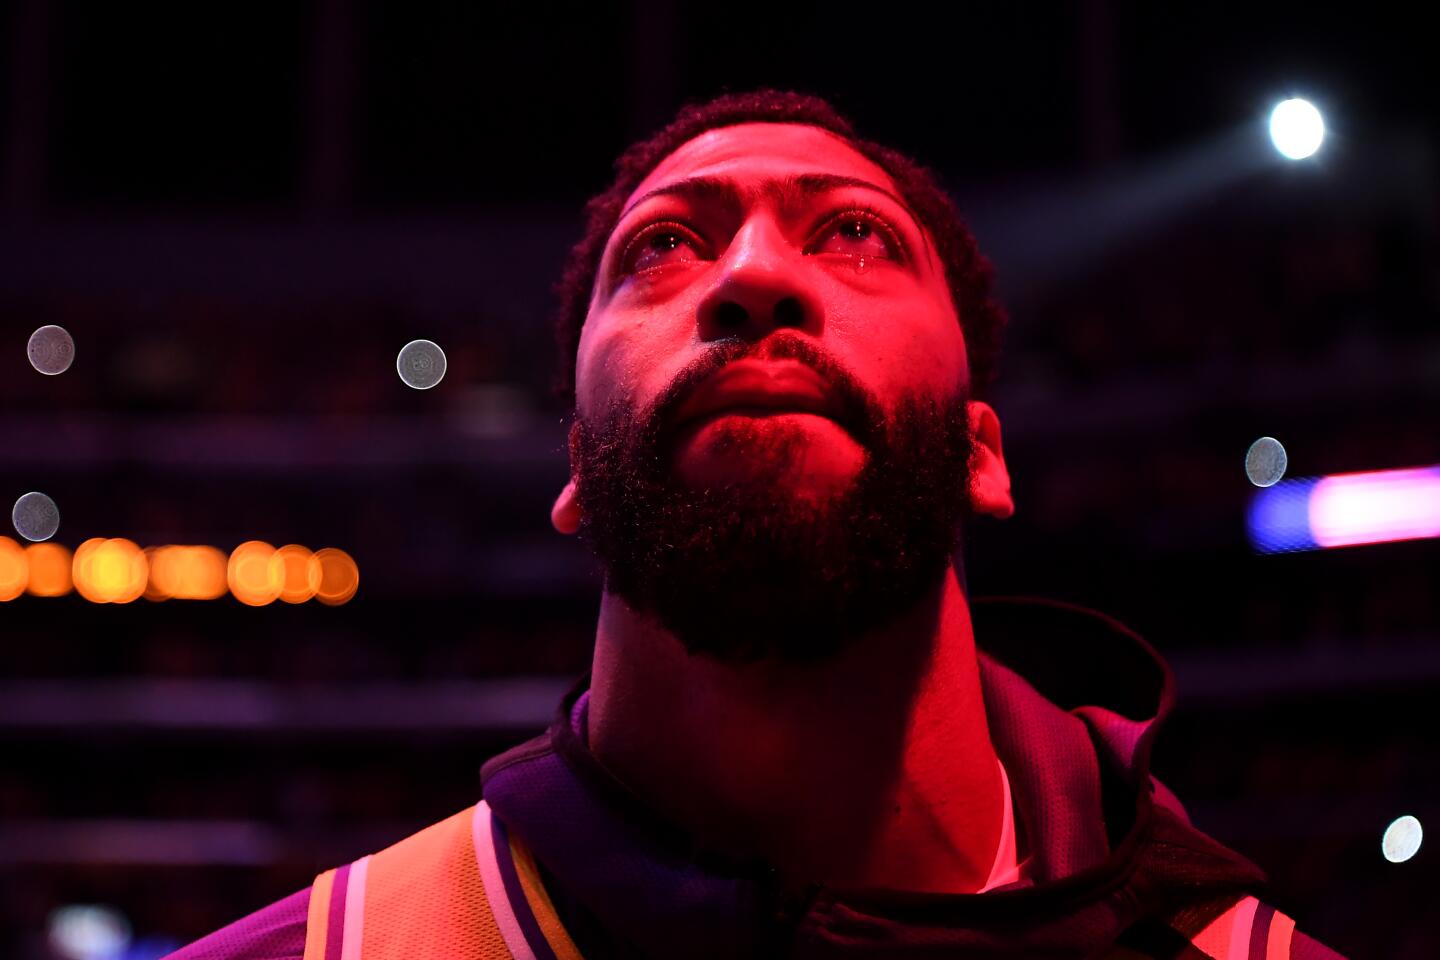 Anthony Davis sheds a tear during the national anthem on a night the Lakers honored the life of Kobe Bryant at Staples Center following his death in a helicopter crash.